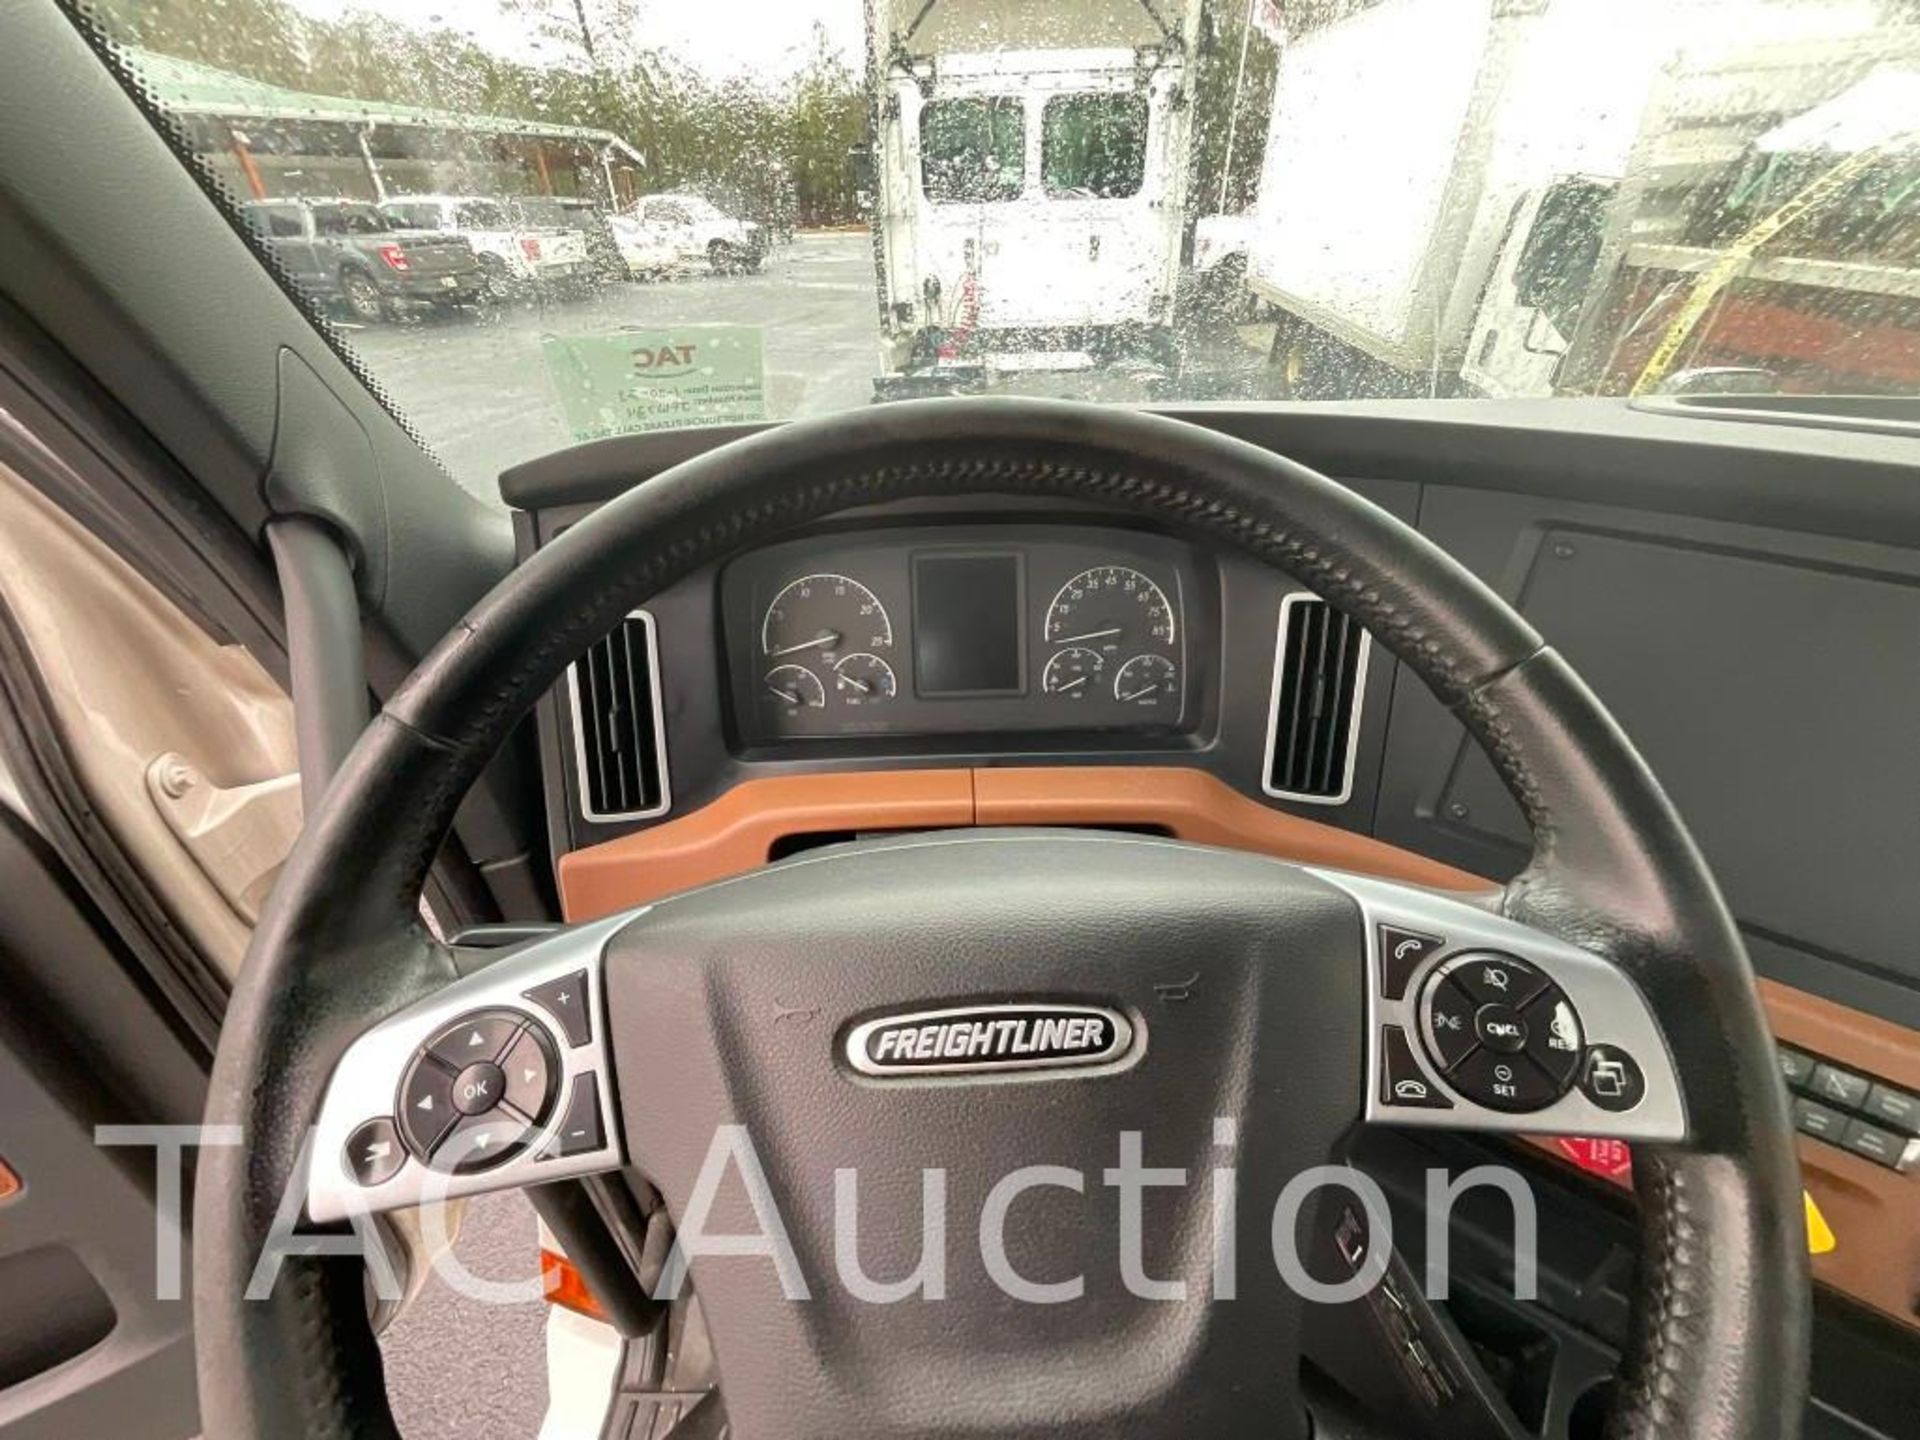 2019 Freightliner Cascadia Day Cab - Image 15 of 54